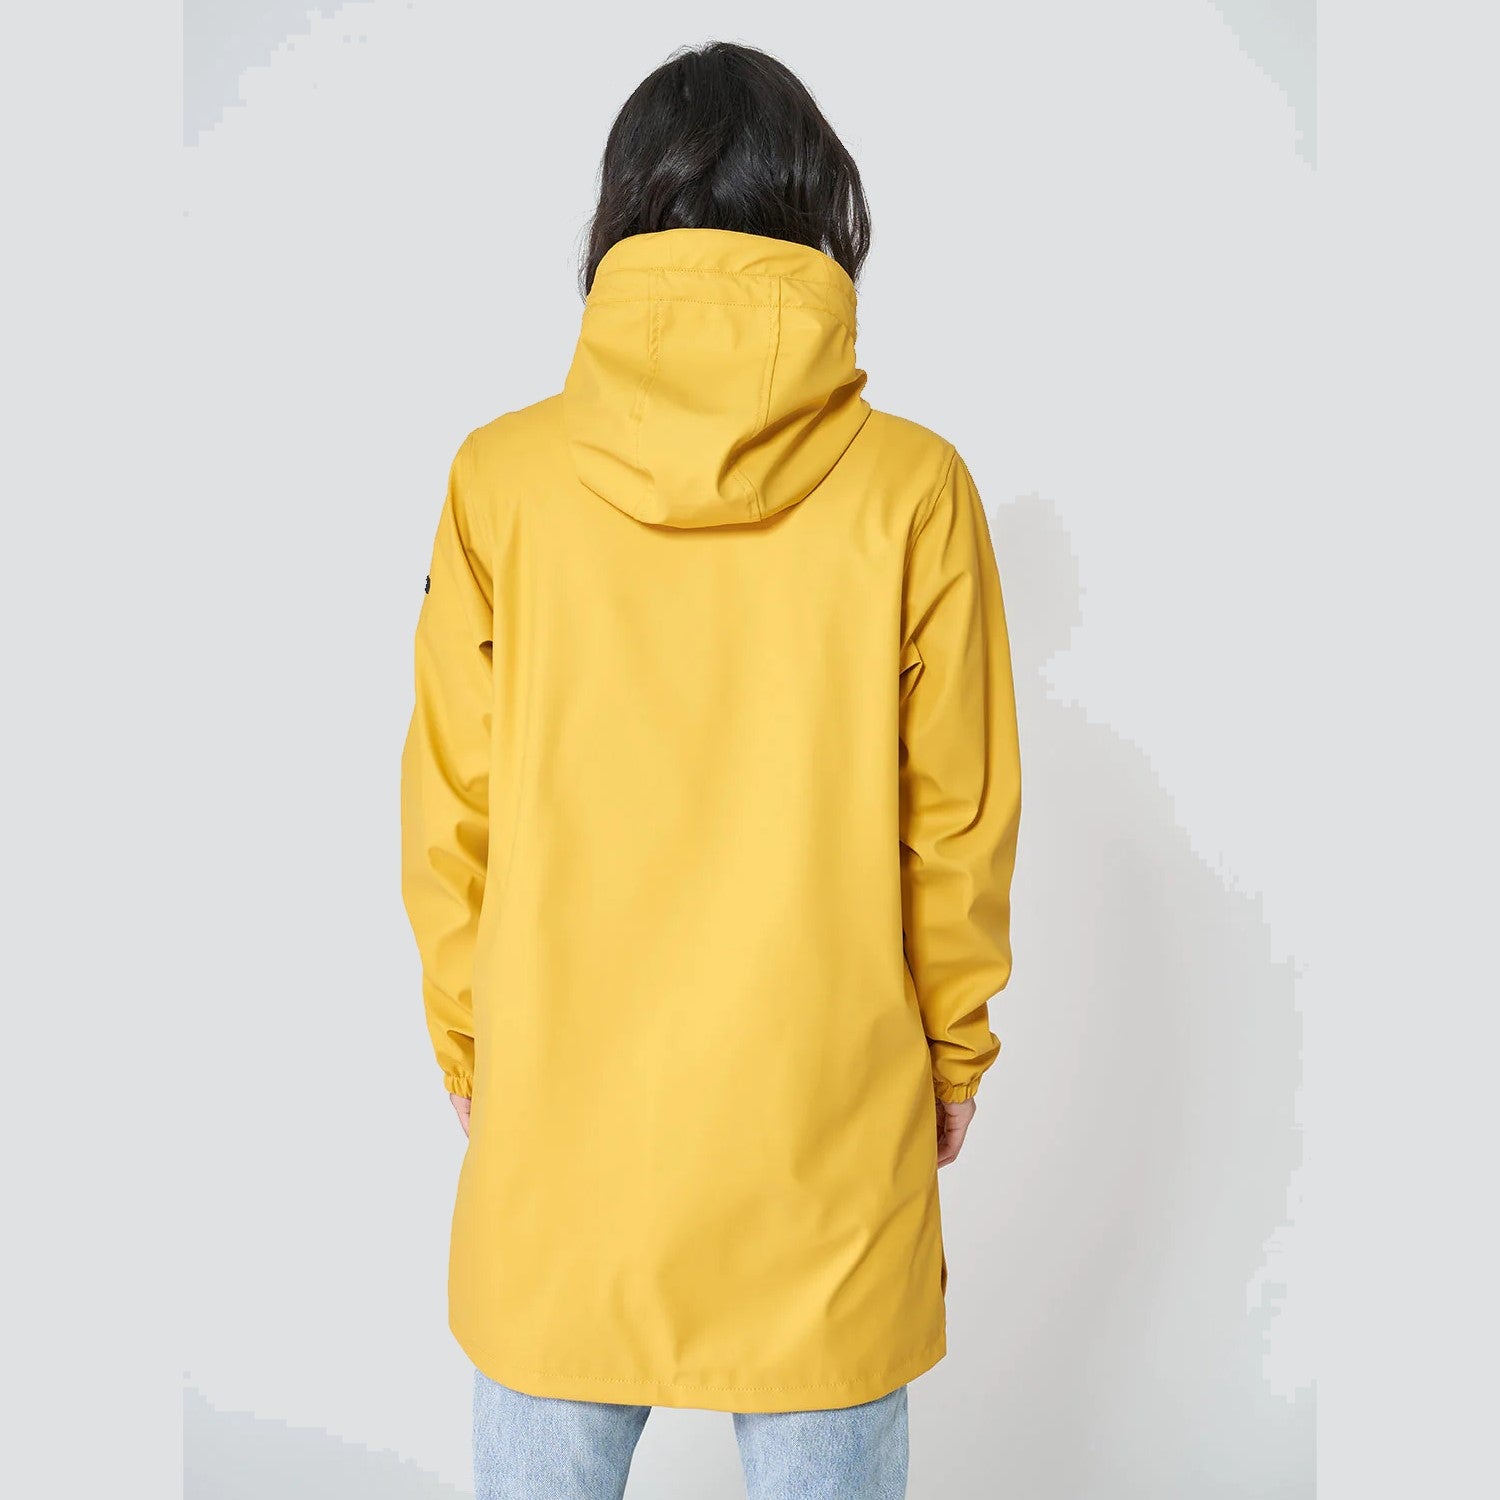 Raincoat with Striped Fleece Lining for Women